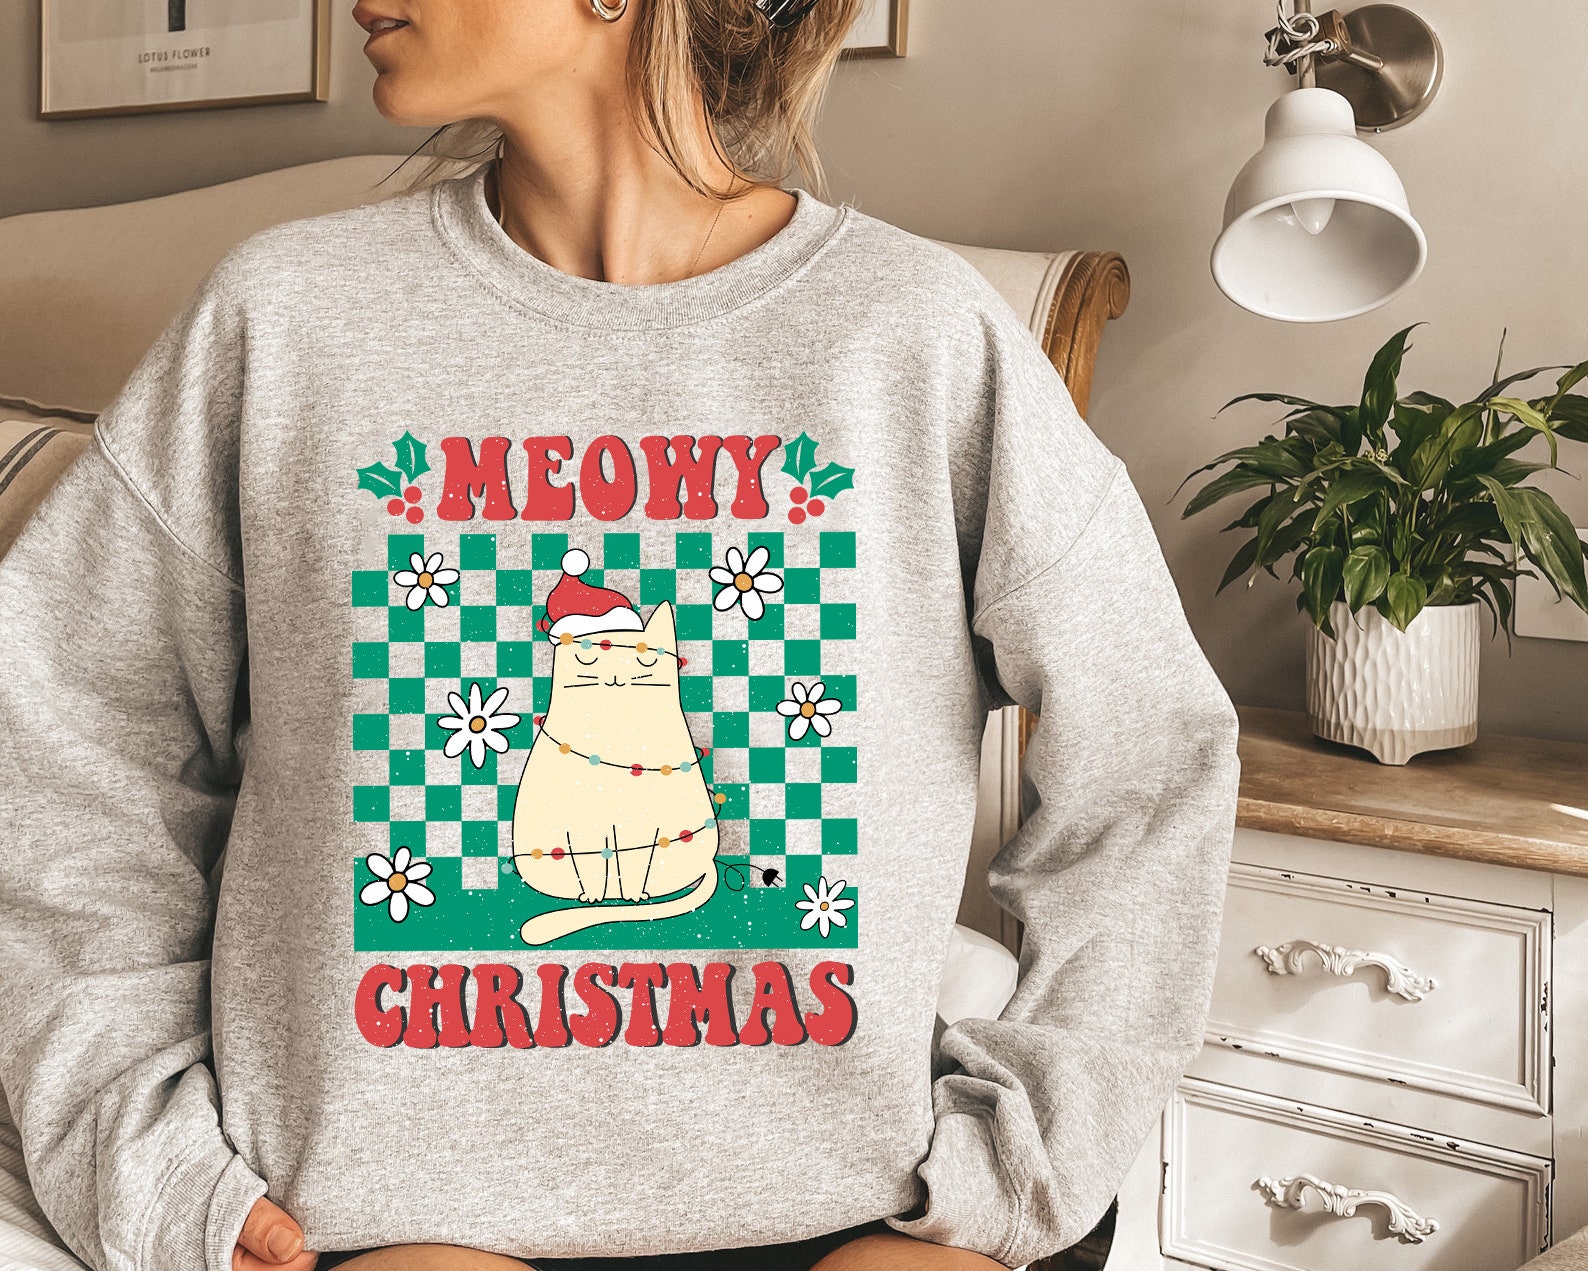 Discover Meowy Christmas Sweatshirt, Ugly Sweater, Classic Christmas Vintage, Xmas Outfit, Cat lover gift, Hippie Christmas Crewneck, vintage graphic